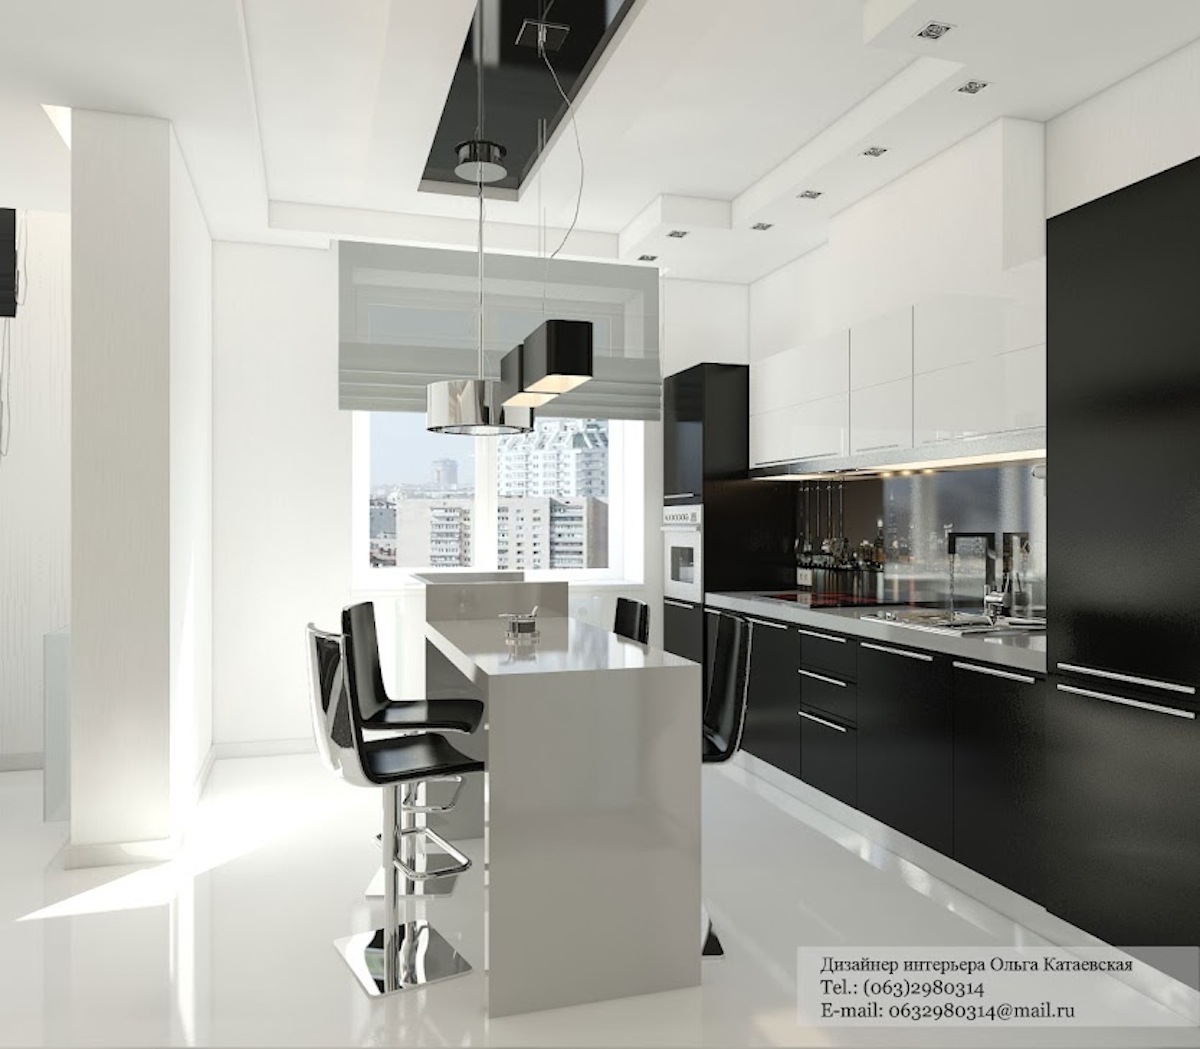 Cabinetry Kitchen Black Black Cabinetry Kitchen And Chrome Black Bar Stools Also Modern Pendant Lights Architecture Luxury Small Home Design With Creative Decoration Layouts